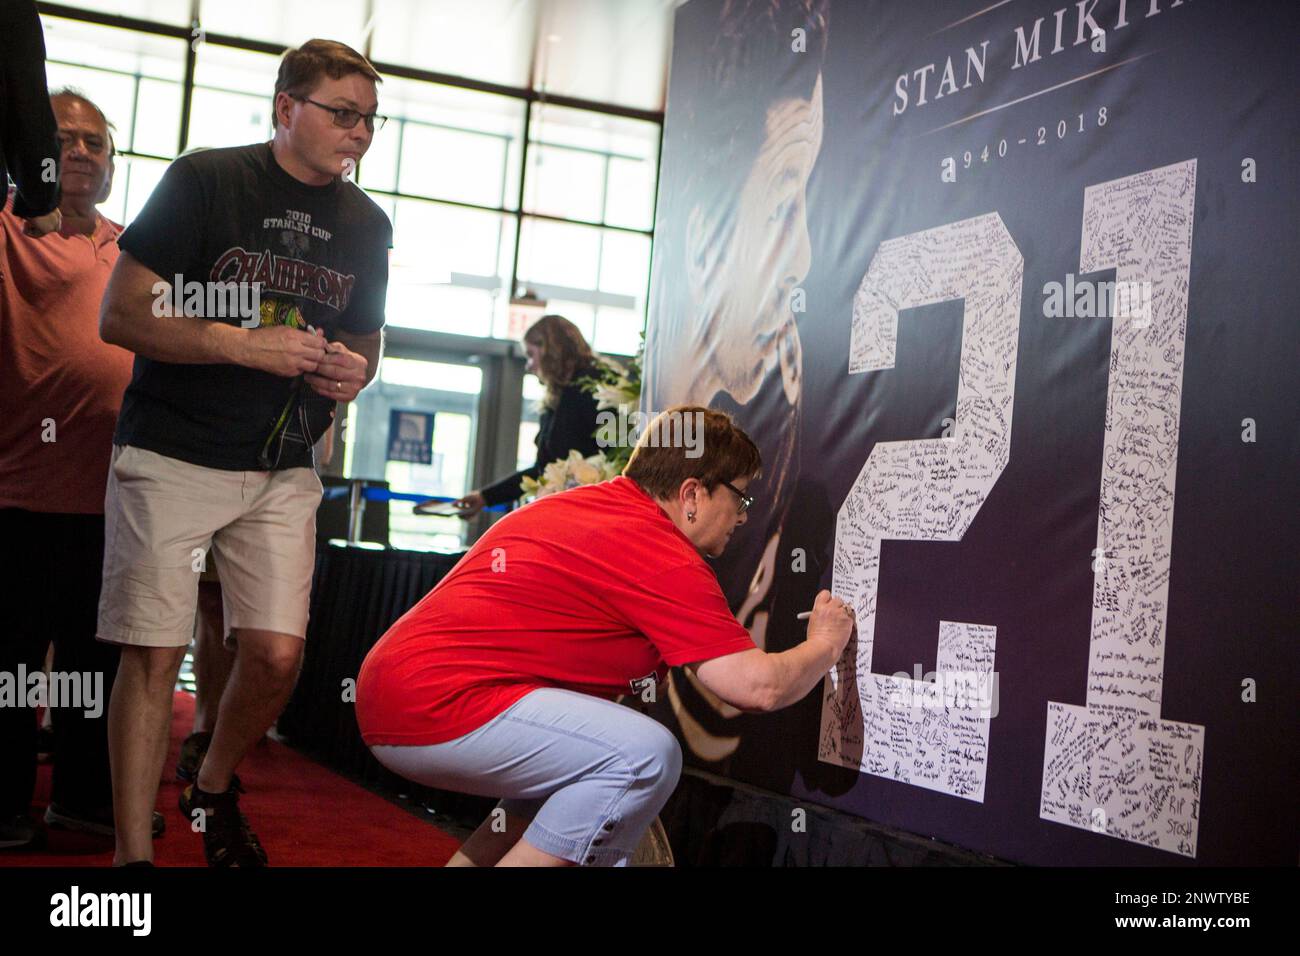 Fans sign a banner at the memorial service for Chicago Blackhawk Stan Mikita  at the United Center, Sunday, Aug. 12, 2018. Mikita, who helped lead the  Blackhawks to the 1961 Stanley Cup